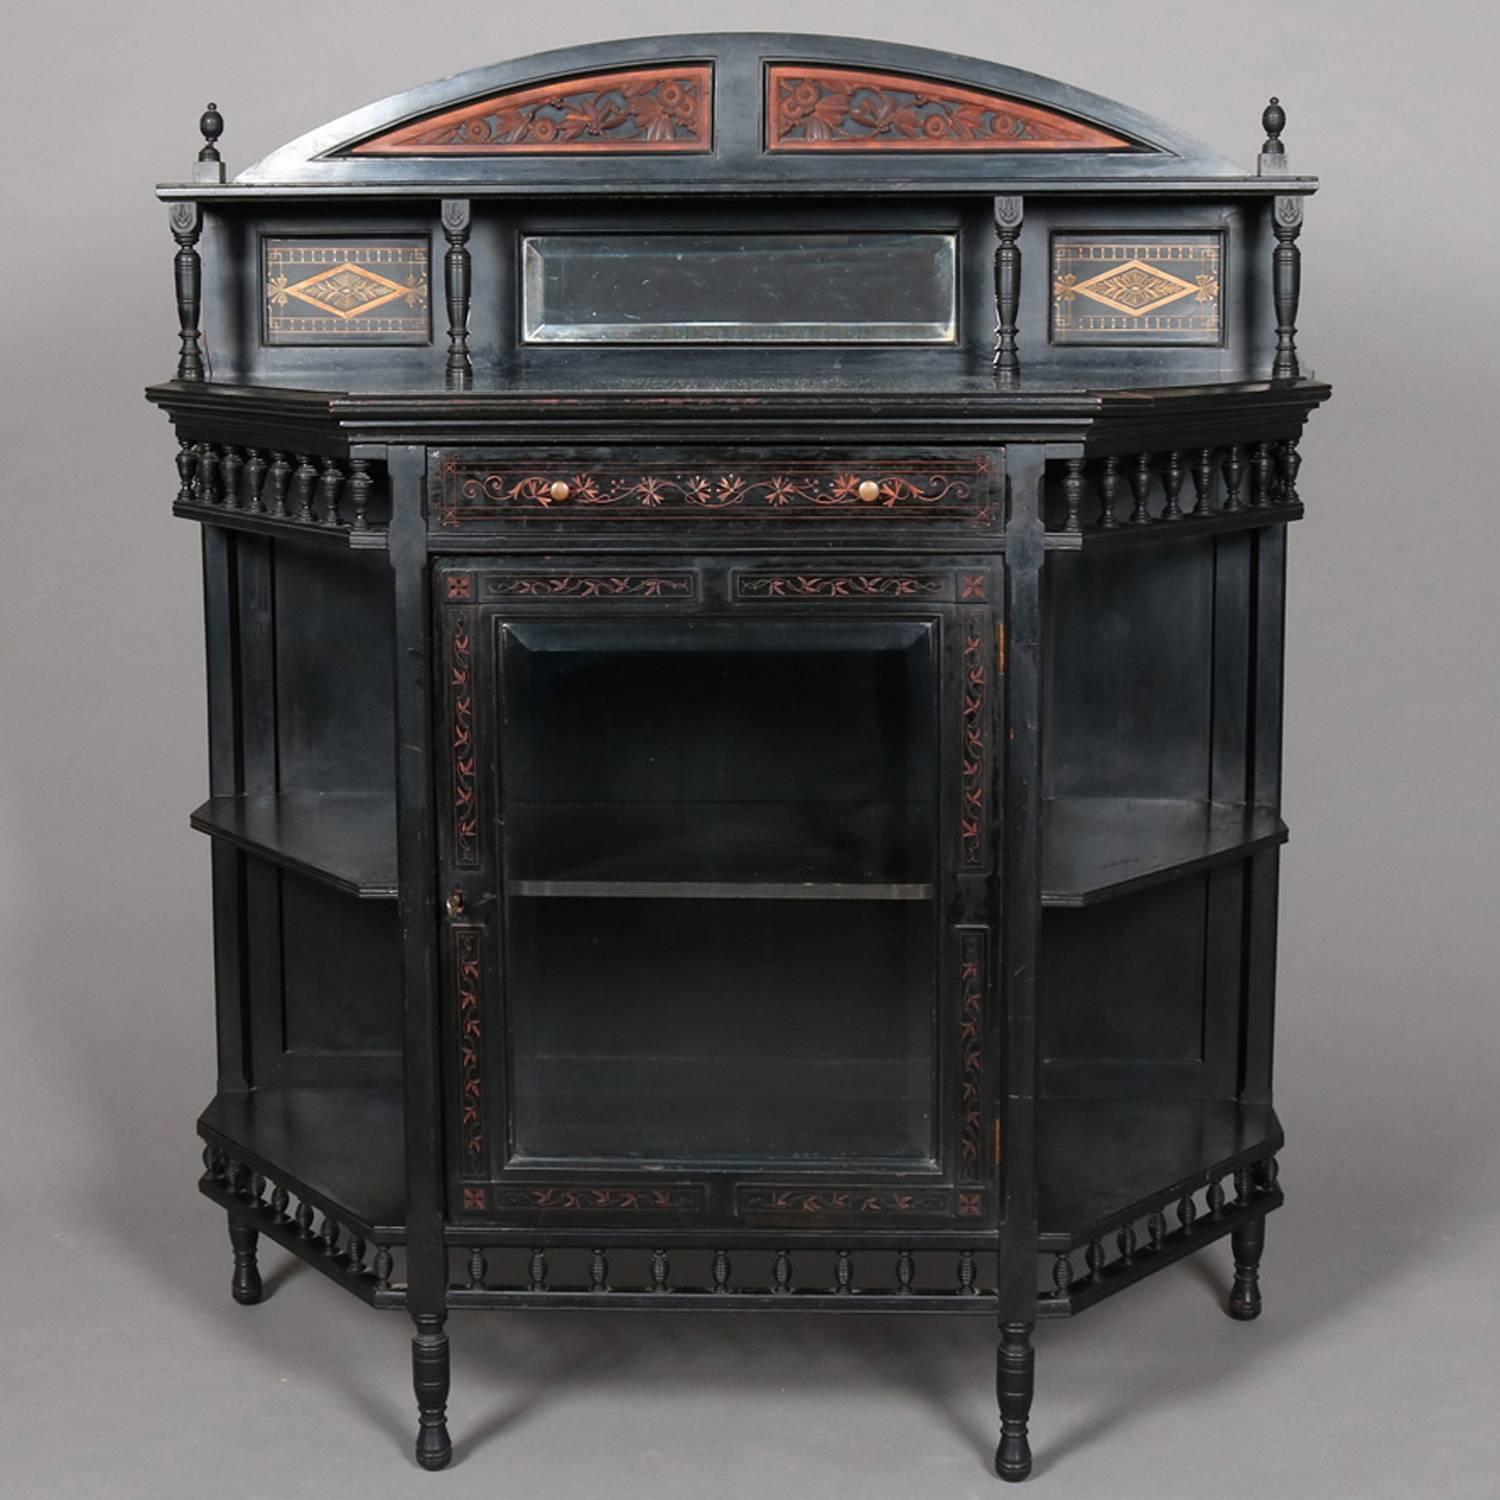 Victorian aesthetic movement Kimbel and Cabus School server features black lacquered case with bevelled mirrored gilt decorated backsplash with display shelf and carved floral demilune crest, single glass door cabinet also with gilt decoration and